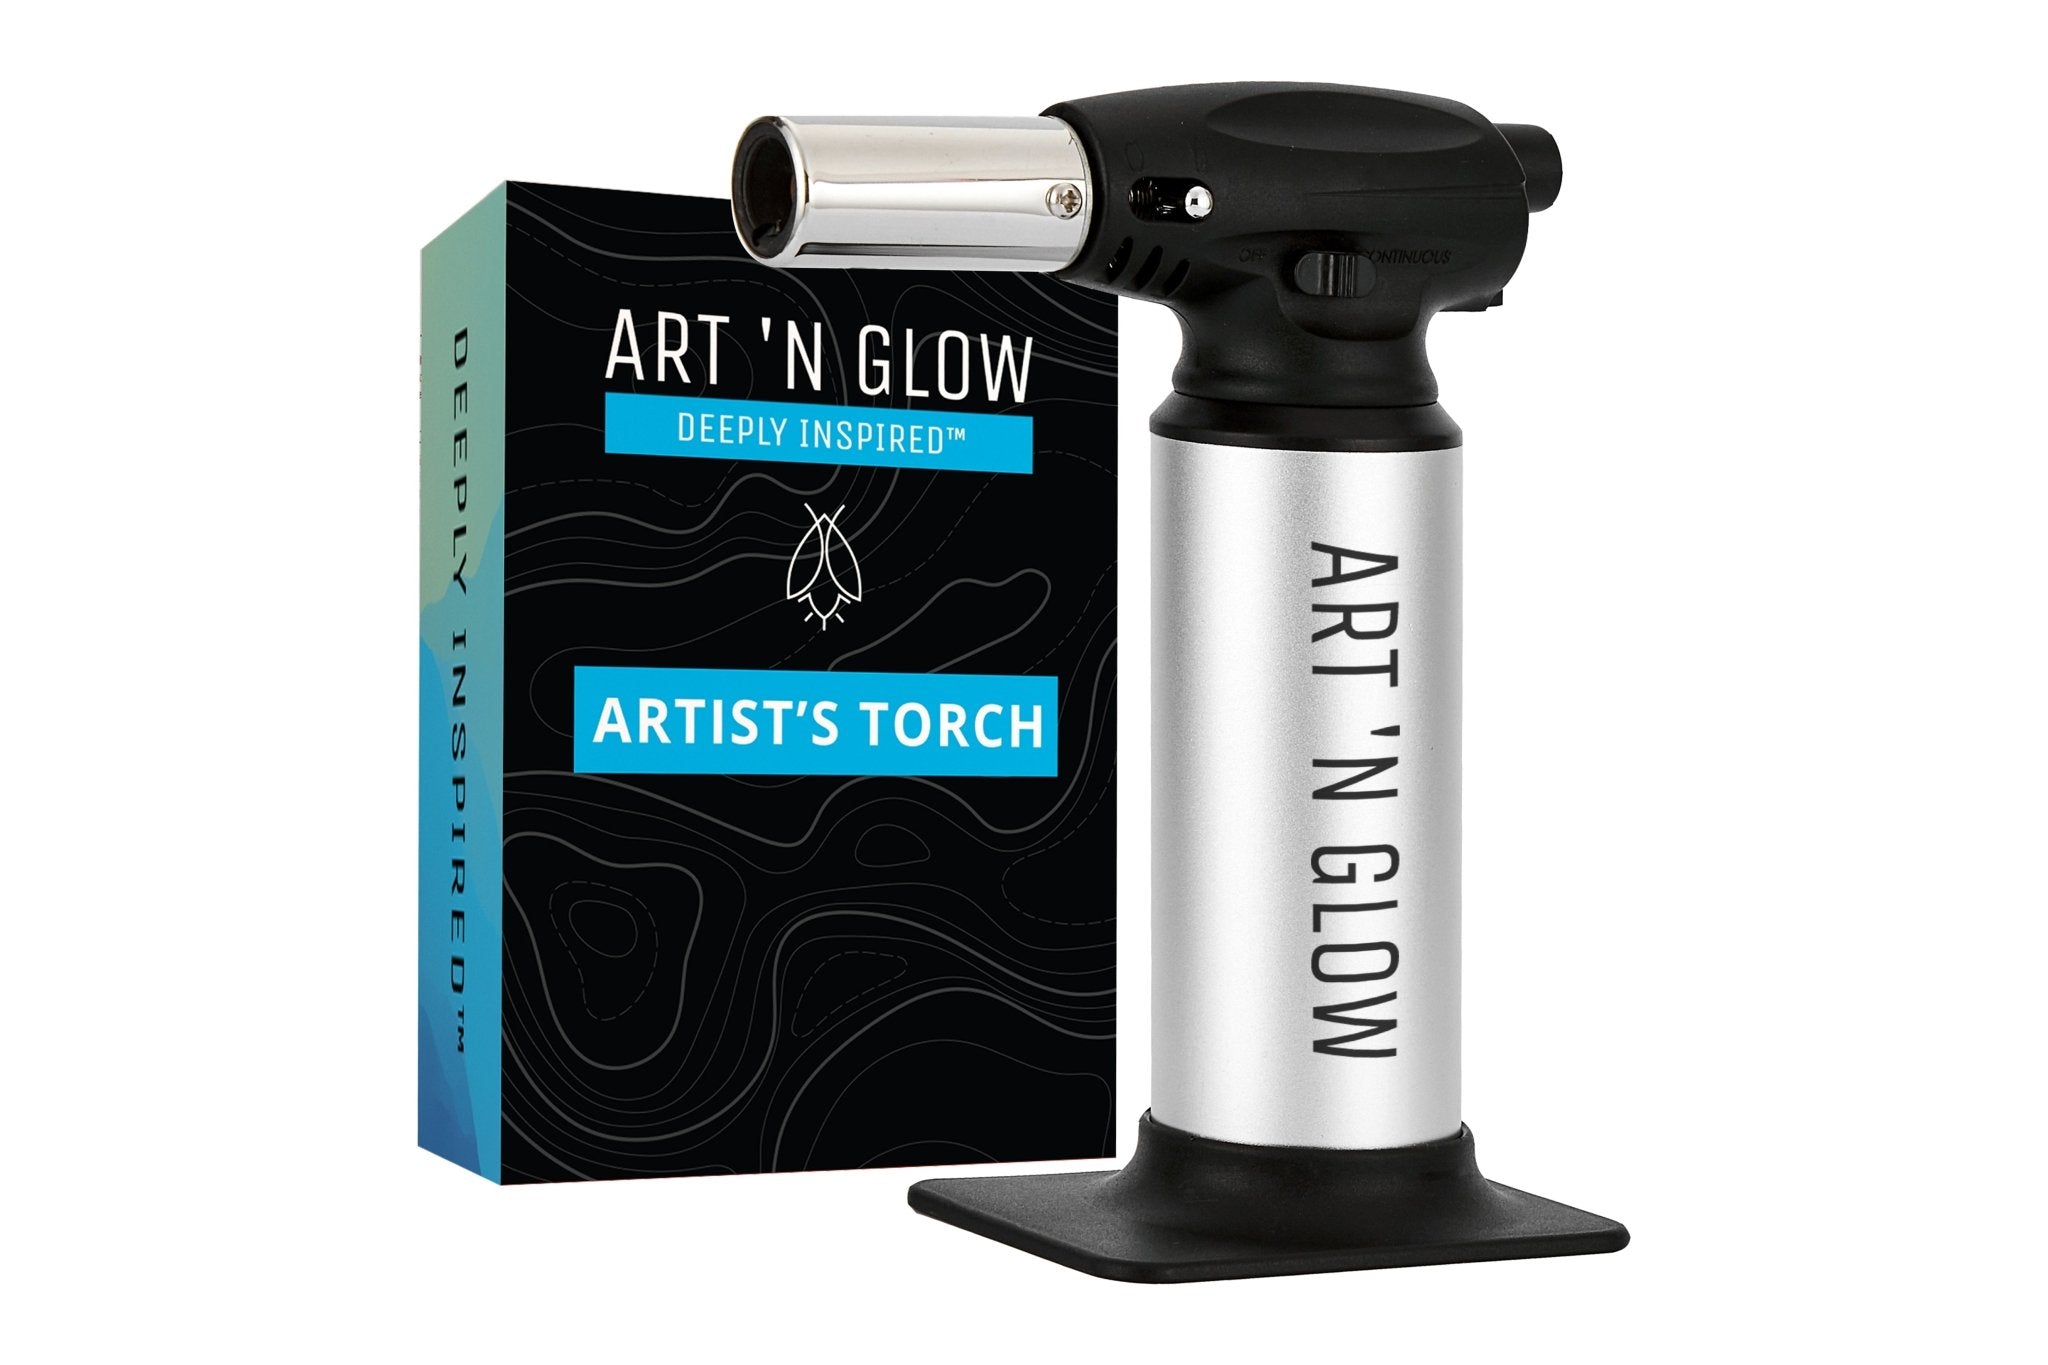 Heat Gun - Epoxy Resin Tools and Accessories by Art 'n Glow